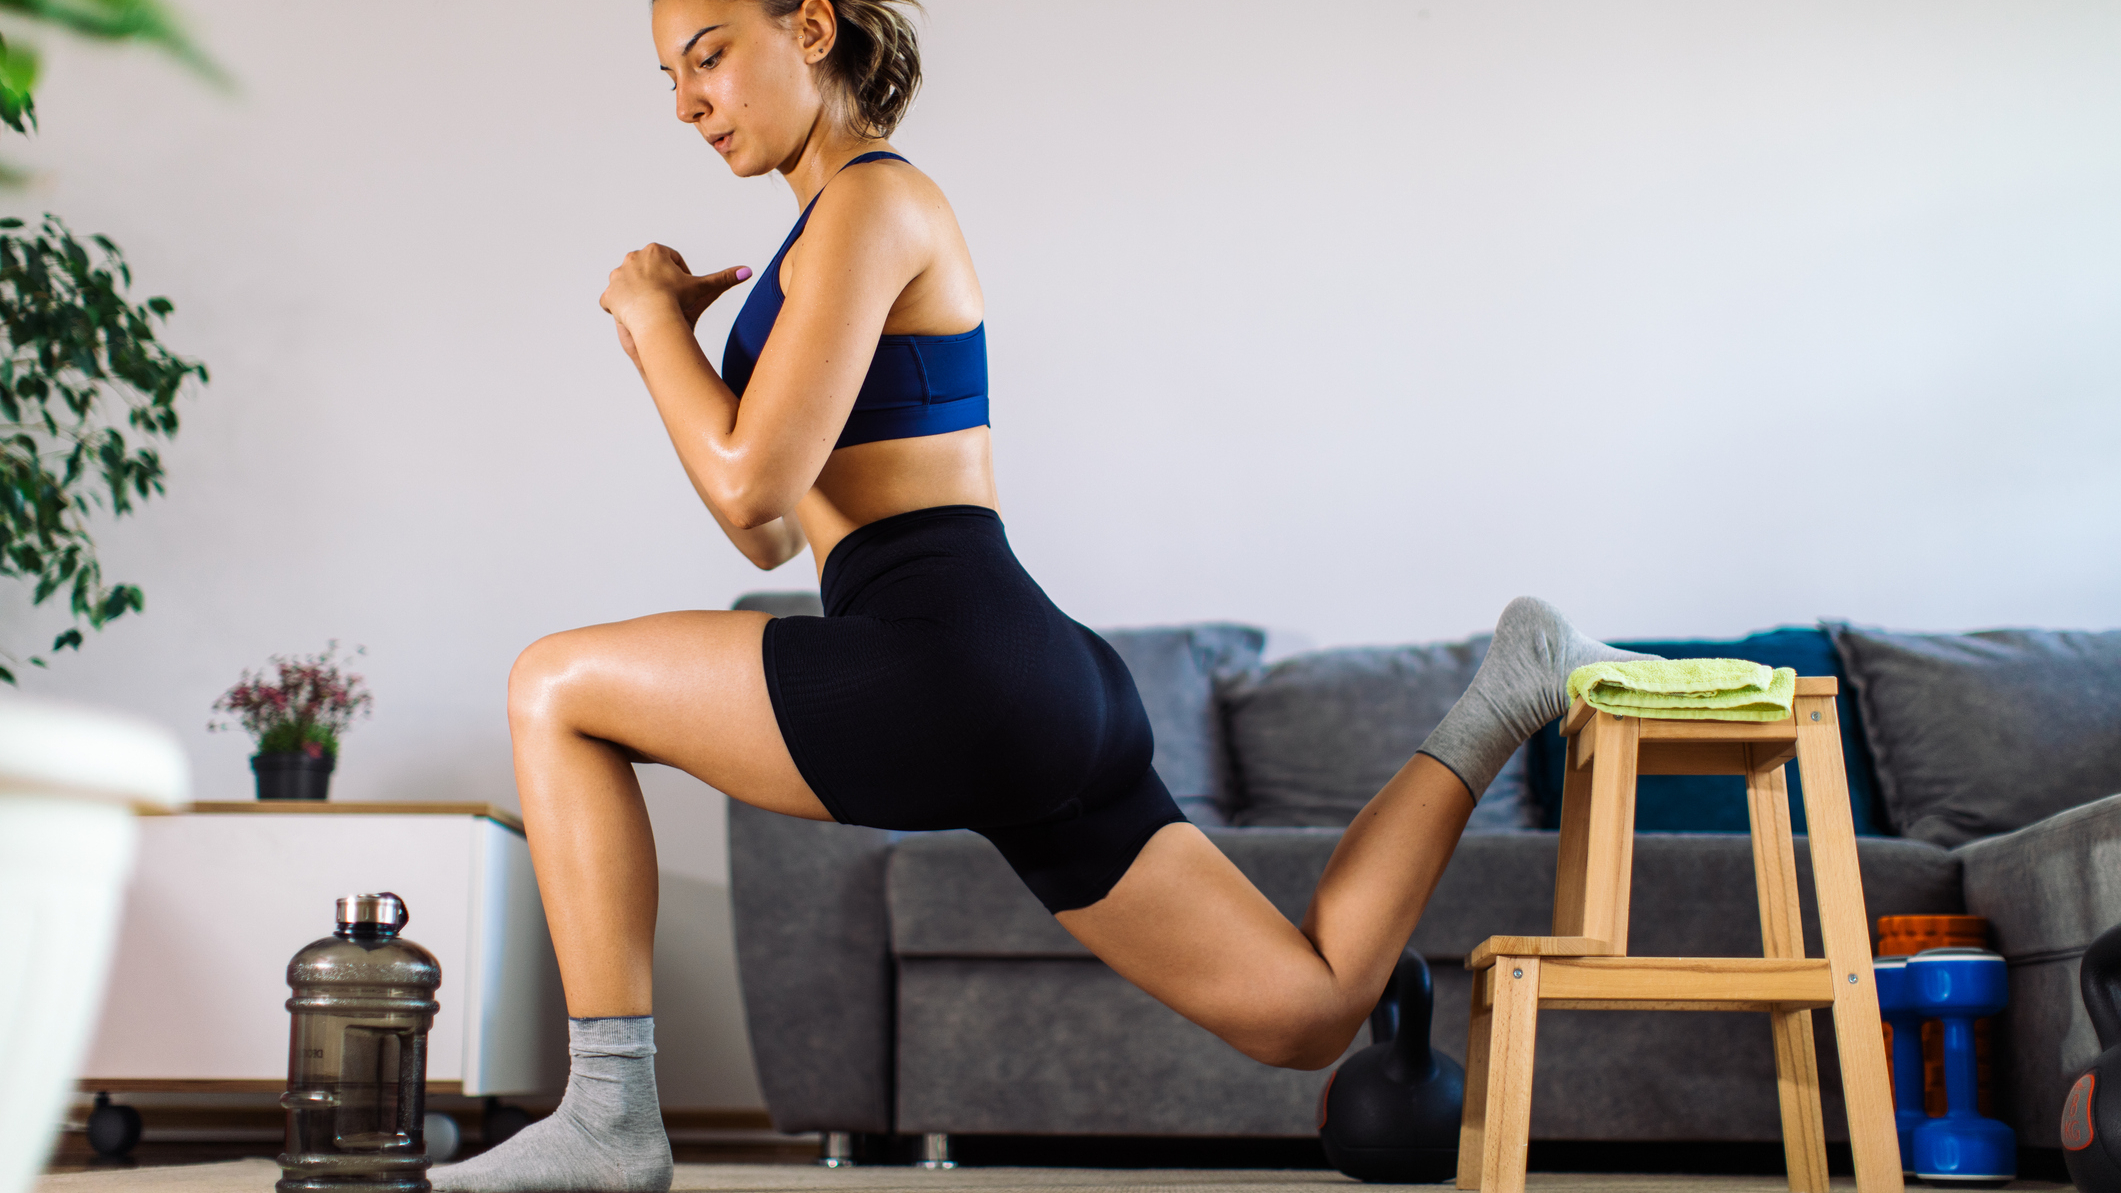 Woman performs Bulgarian split squat at home with her rear foot elevated on a foot stool